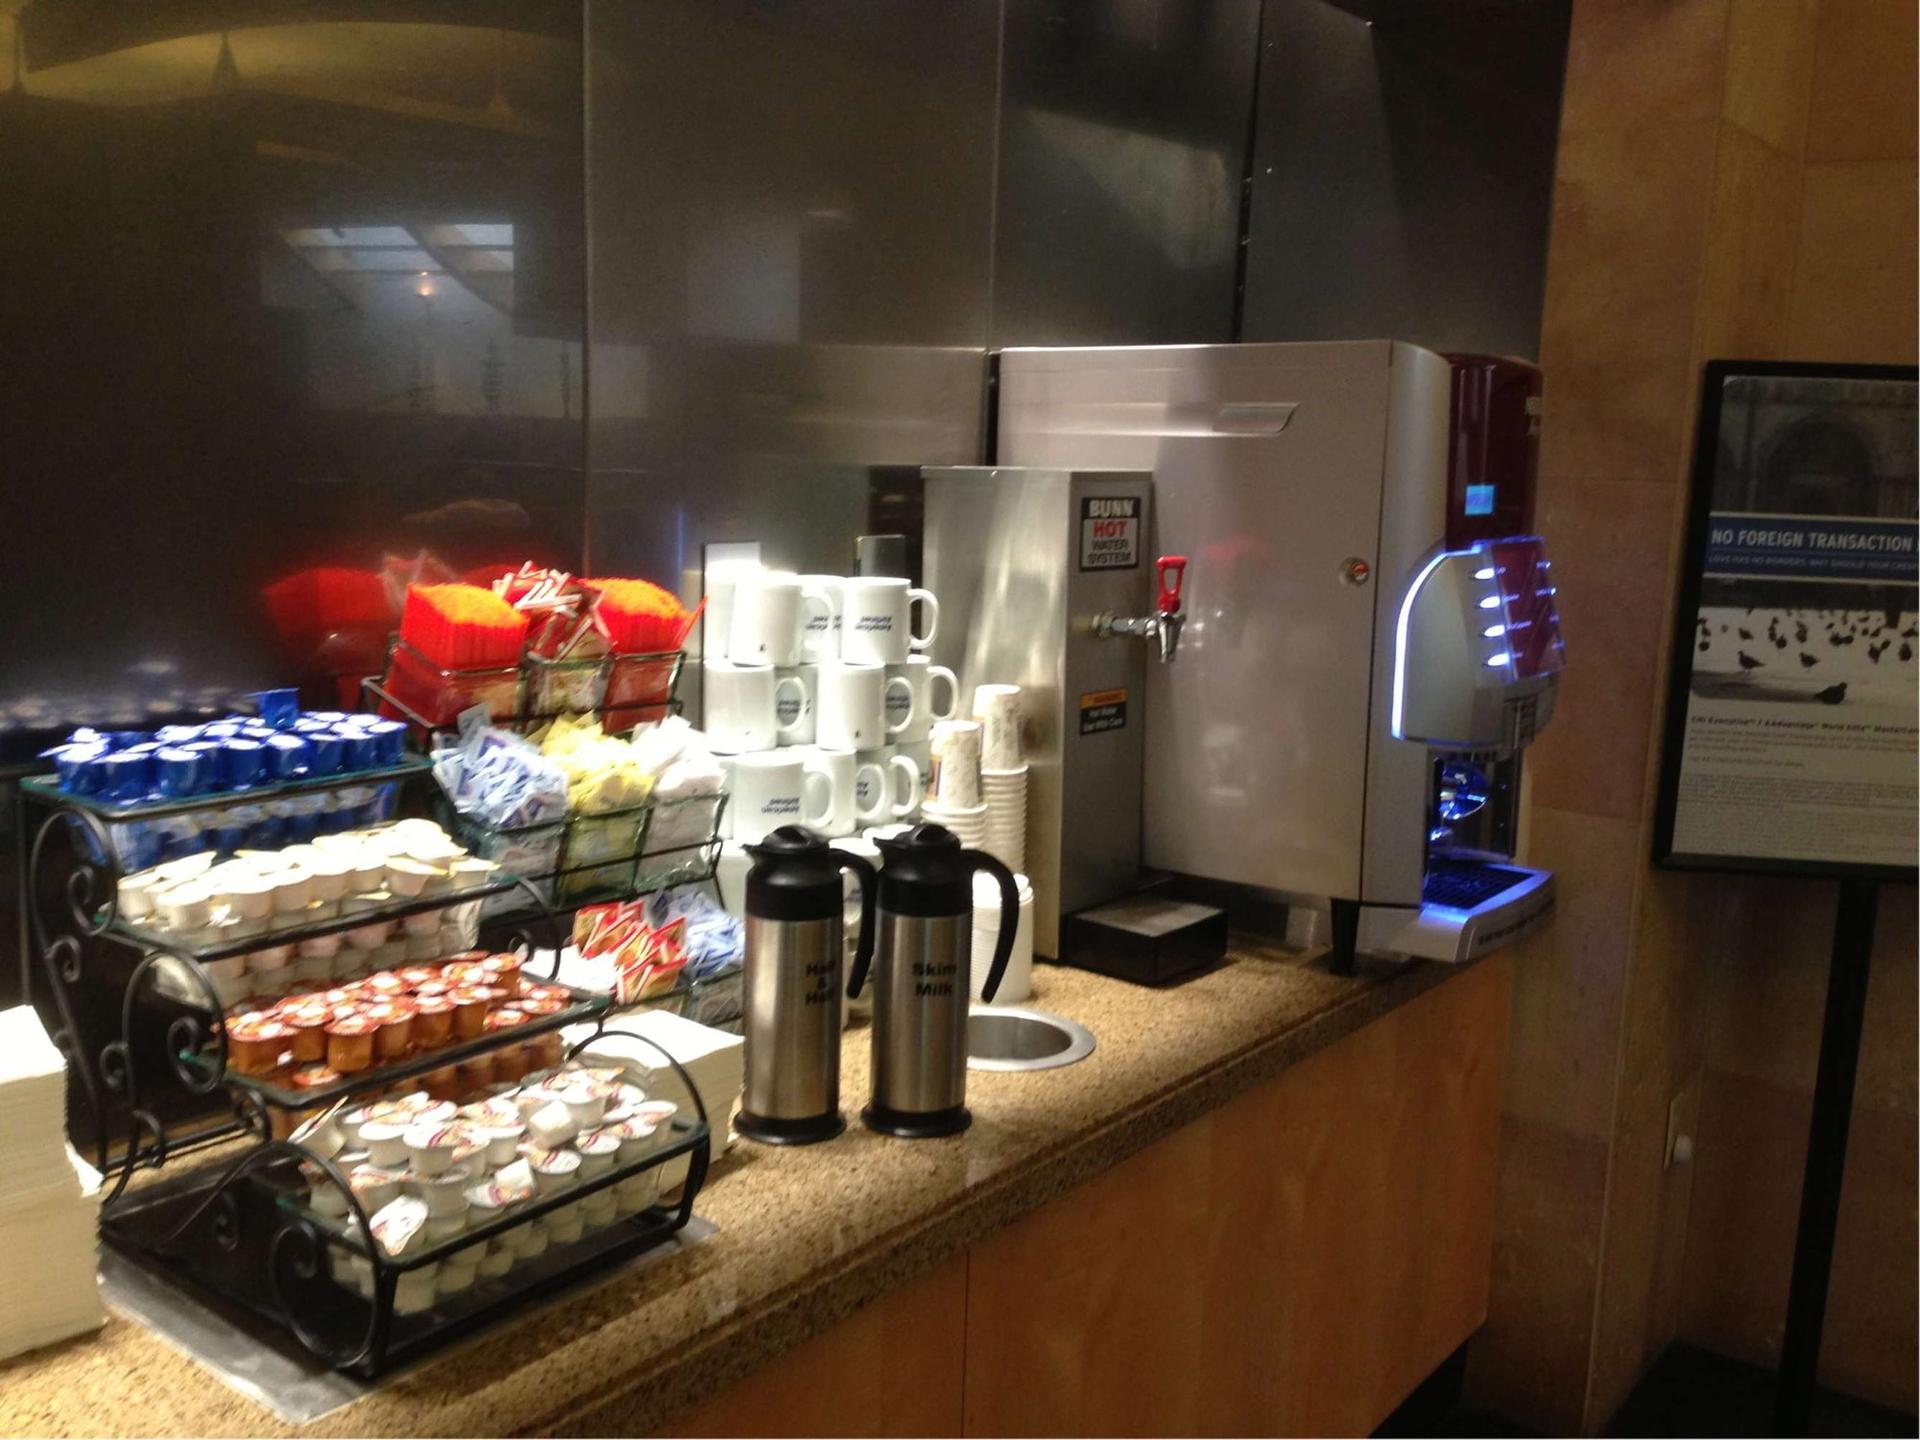 American Airlines Admirals Club image 3 of 17